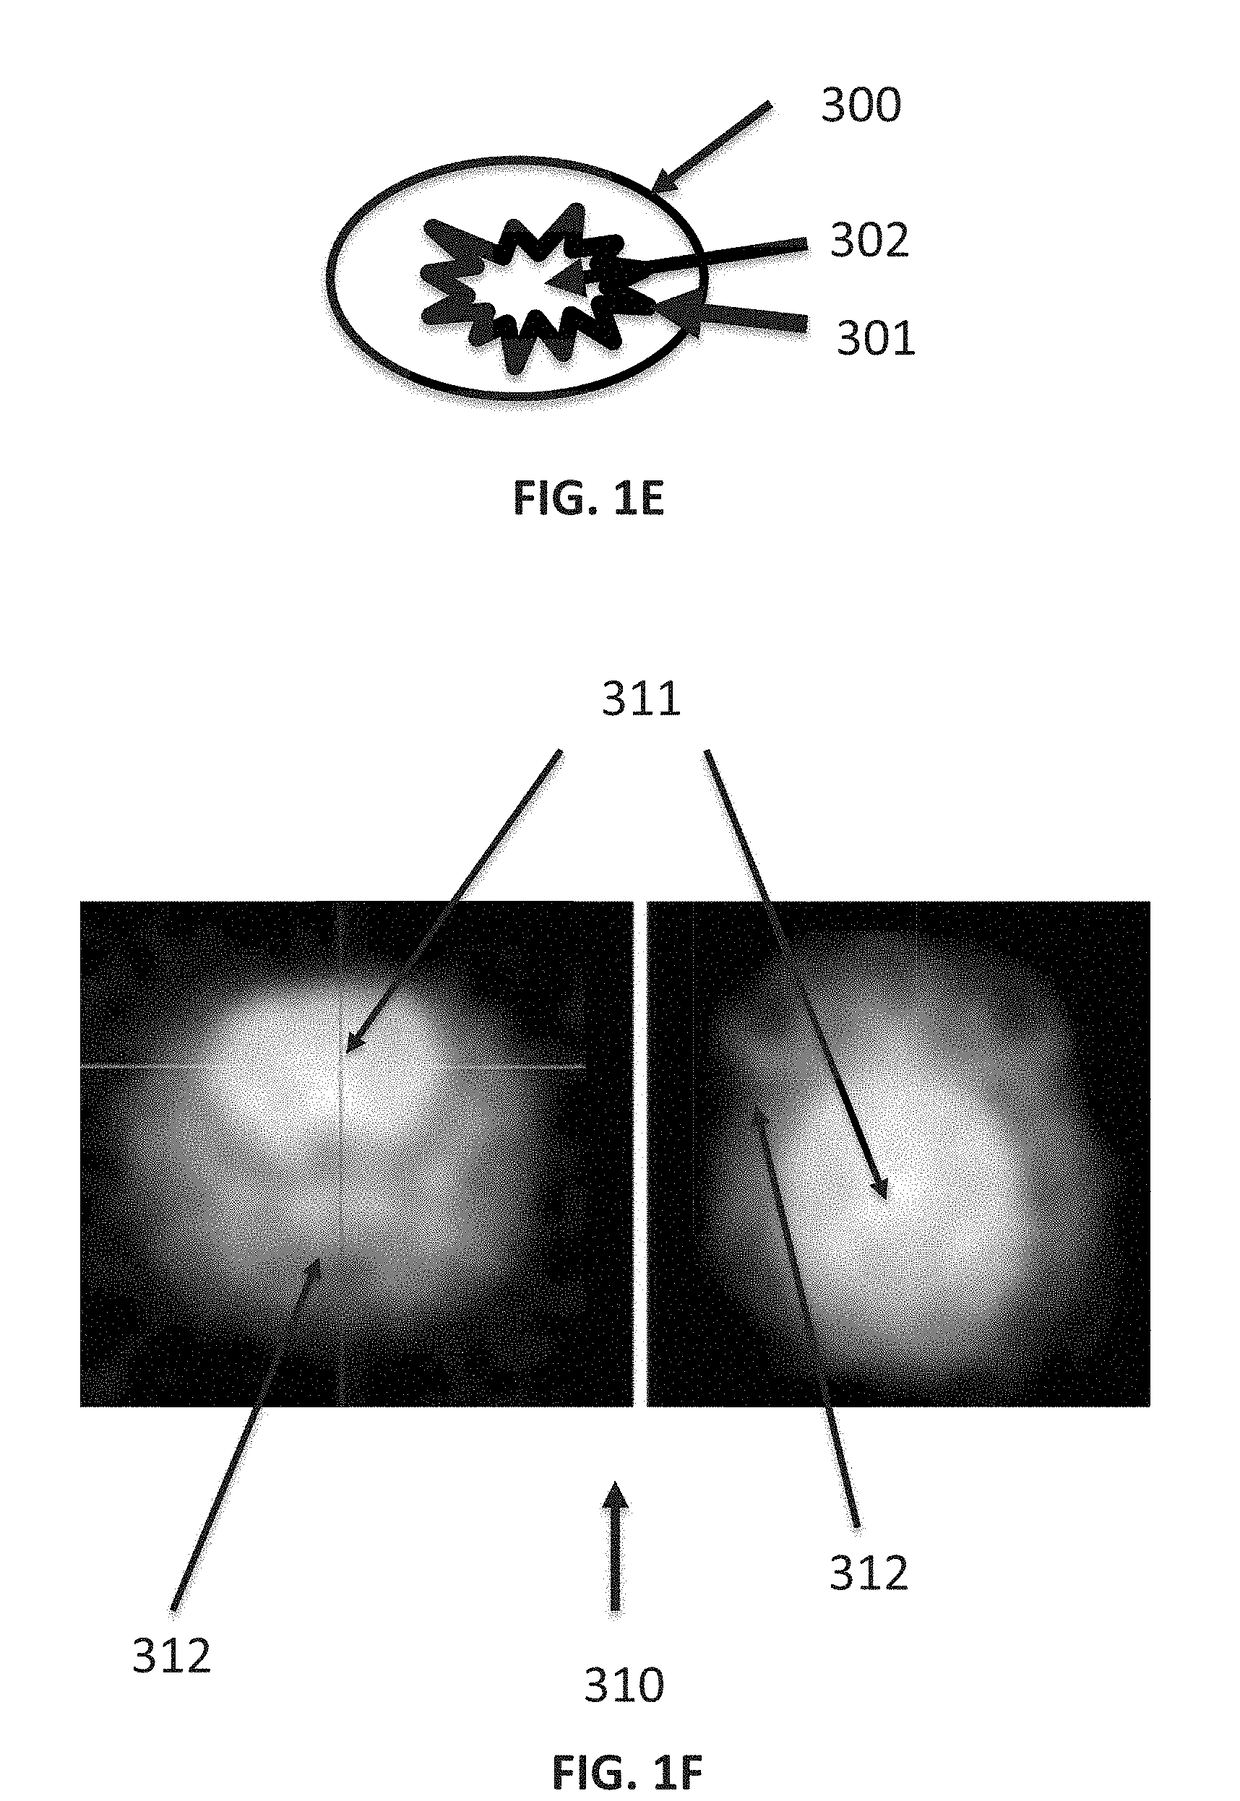 Calibration of radiation therapy treatment plans for a system